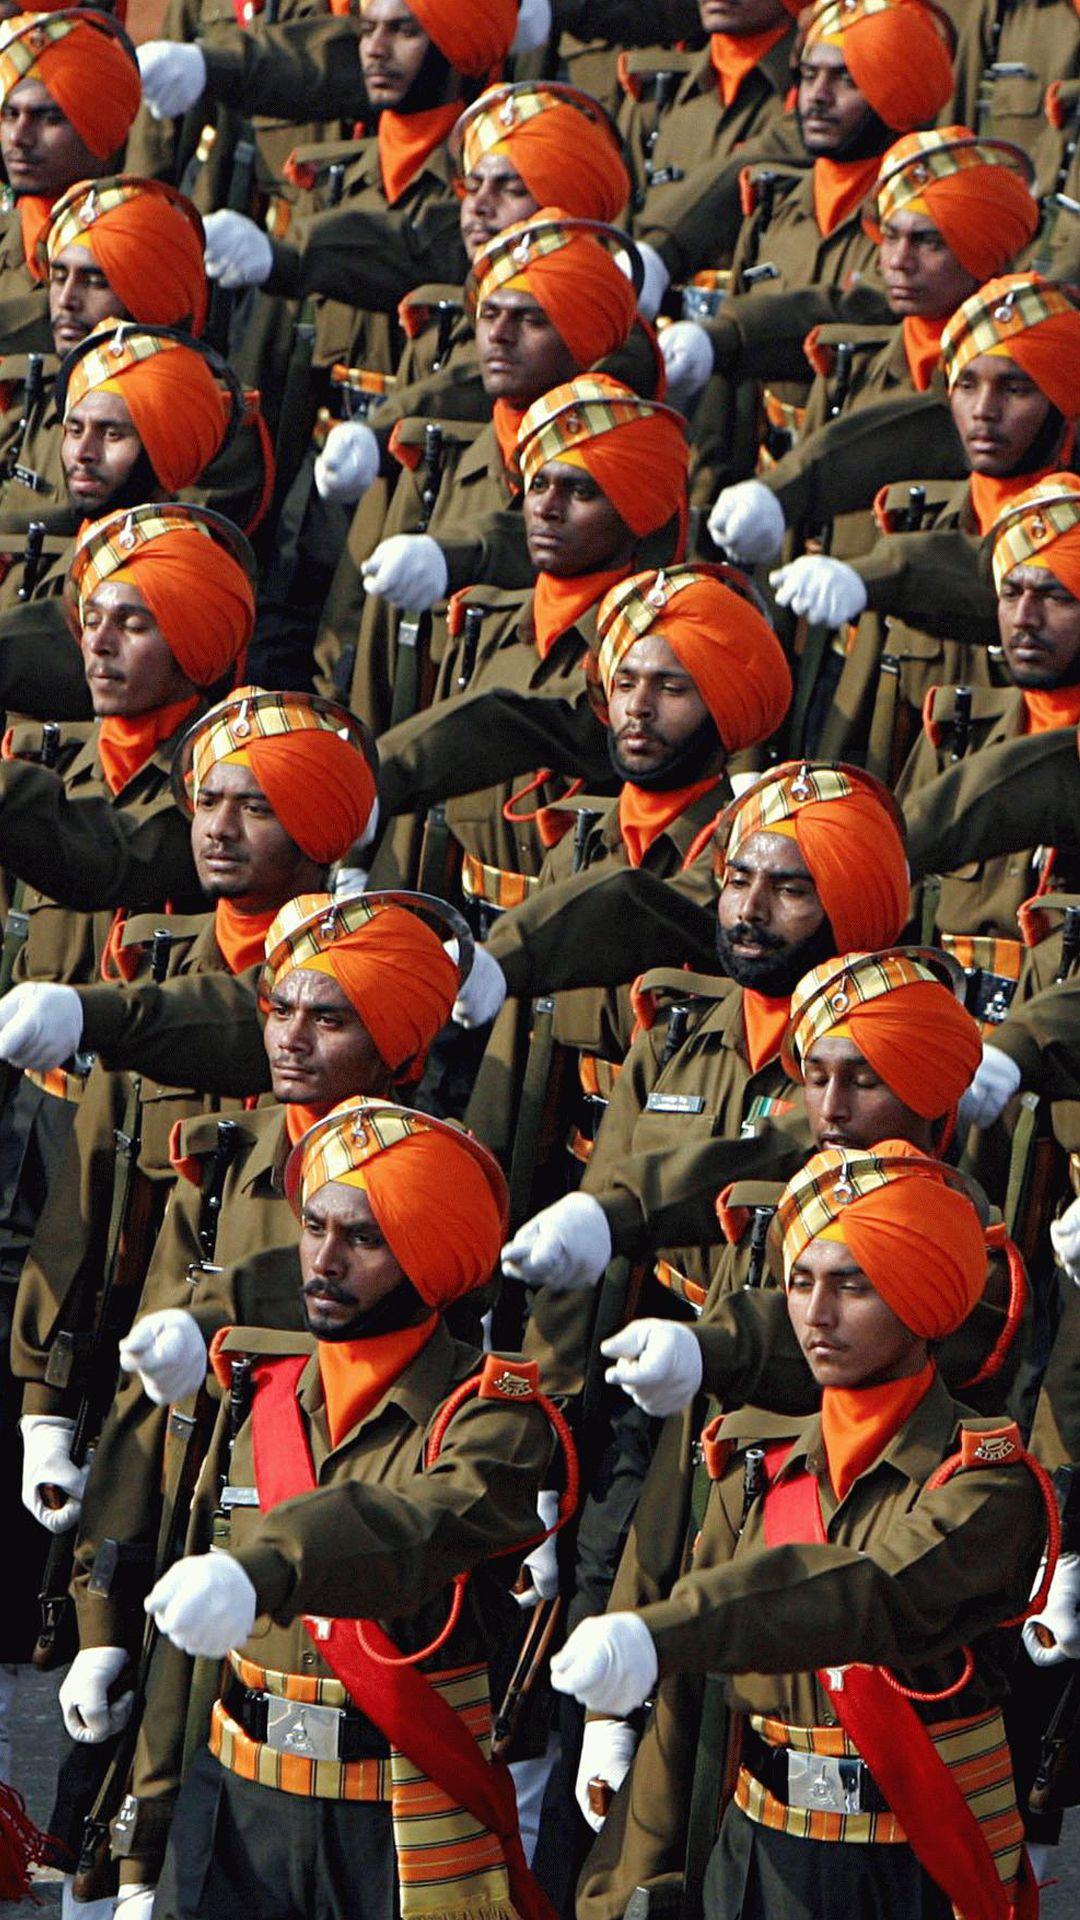 Indian Army Wallpaper for Mobile Phone. HD Wallpaper. Wallpaper